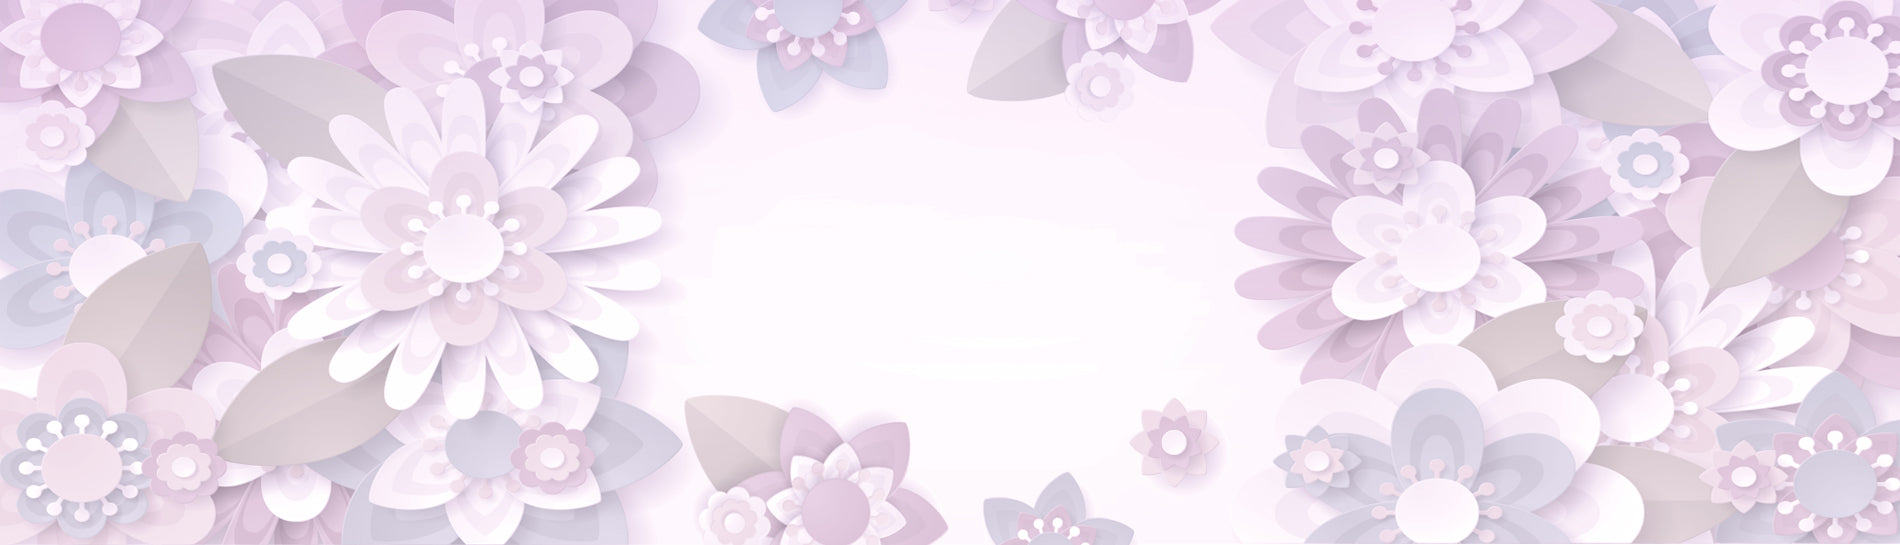 Spring flowers background graphic